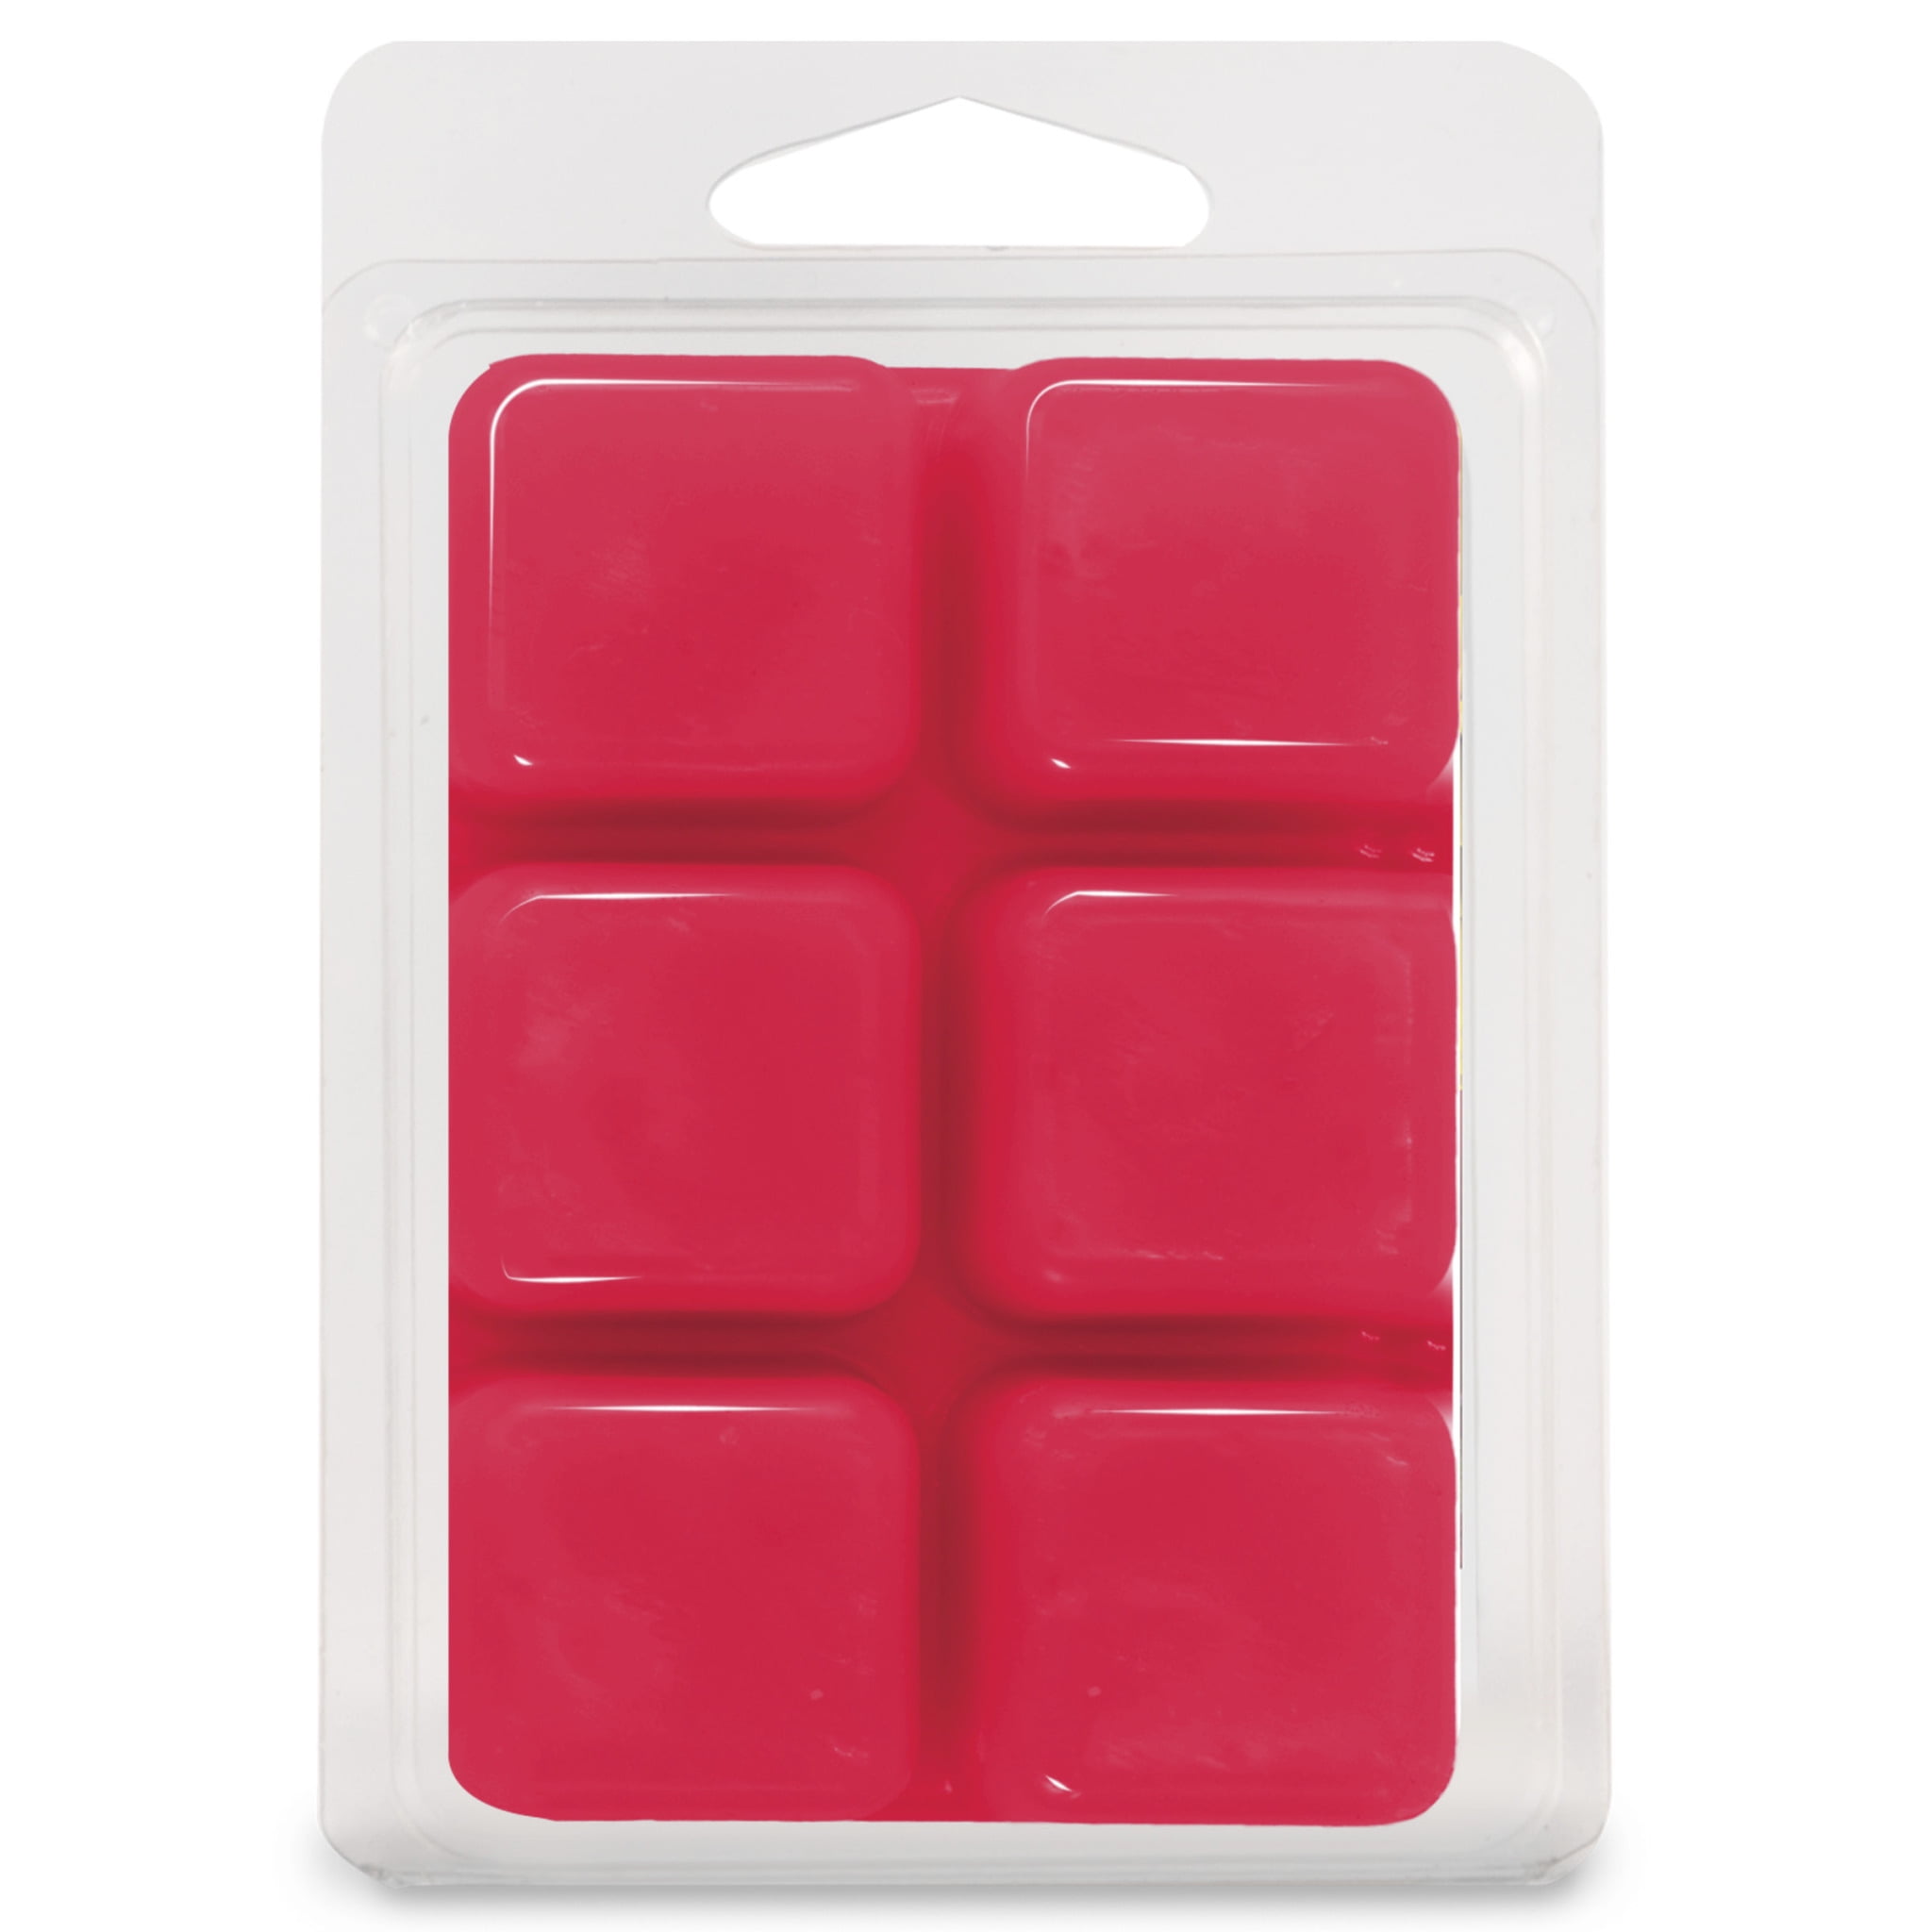 Red Roses Wax Melts Heart Shaped - 16 Highly Scented Wax Melts in A Presentation Gift Box 3.2 oz Pack, Natural Candle, Soy Wax Melt Cubes Shaped As